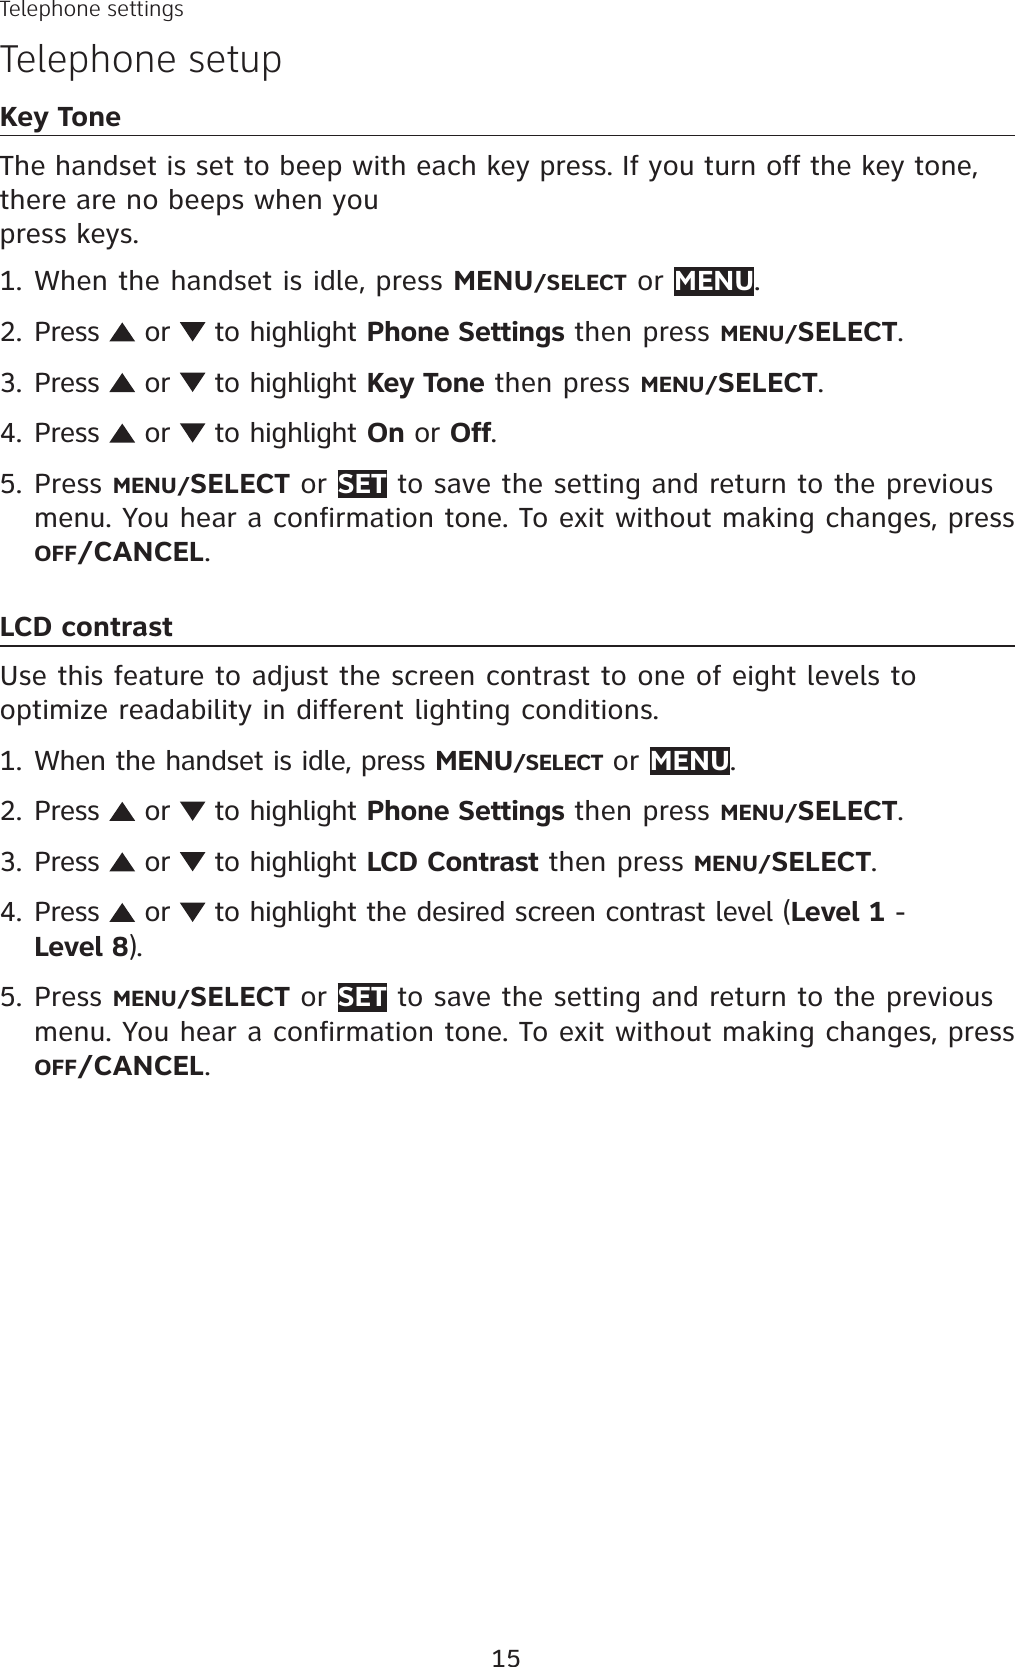 15Telephone settingsTelephone setupKey ToneThe handset is set to beep with each key press. If you turn off the key tone, there are no beeps when you press keys.When the handset is idle, press MENU/SELECT or MENU.Press   or   to highlight Phone Settings then press MENU/SELECT.Press   or   to highlight Key Tone then press MENU/SELECT.Press   or   to highlight On or Off.Press MENU/SELECT or SET to save the setting and return to the previous menu. You hear a confirmation tone. To exit without making changes, press OFF/CANCEL.LCD contrastUse this feature to adjust the screen contrast to one of eight levels to optimize readability in different lighting conditions.When the handset is idle, press MENU/SELECT or MENU.Press   or   to highlight Phone Settings then press MENU/SELECT.Press   or   to highlight LCD Contrast then press MENU/SELECT.Press   or   to highlight the desired screen contrast level (Level 1 - Level 8).Press MENU/SELECT or SET to save the setting and return to the previous menu. You hear a confirmation tone. To exit without making changes, press OFF/CANCEL.1.2.3.4.5.1.2.3.4.5.